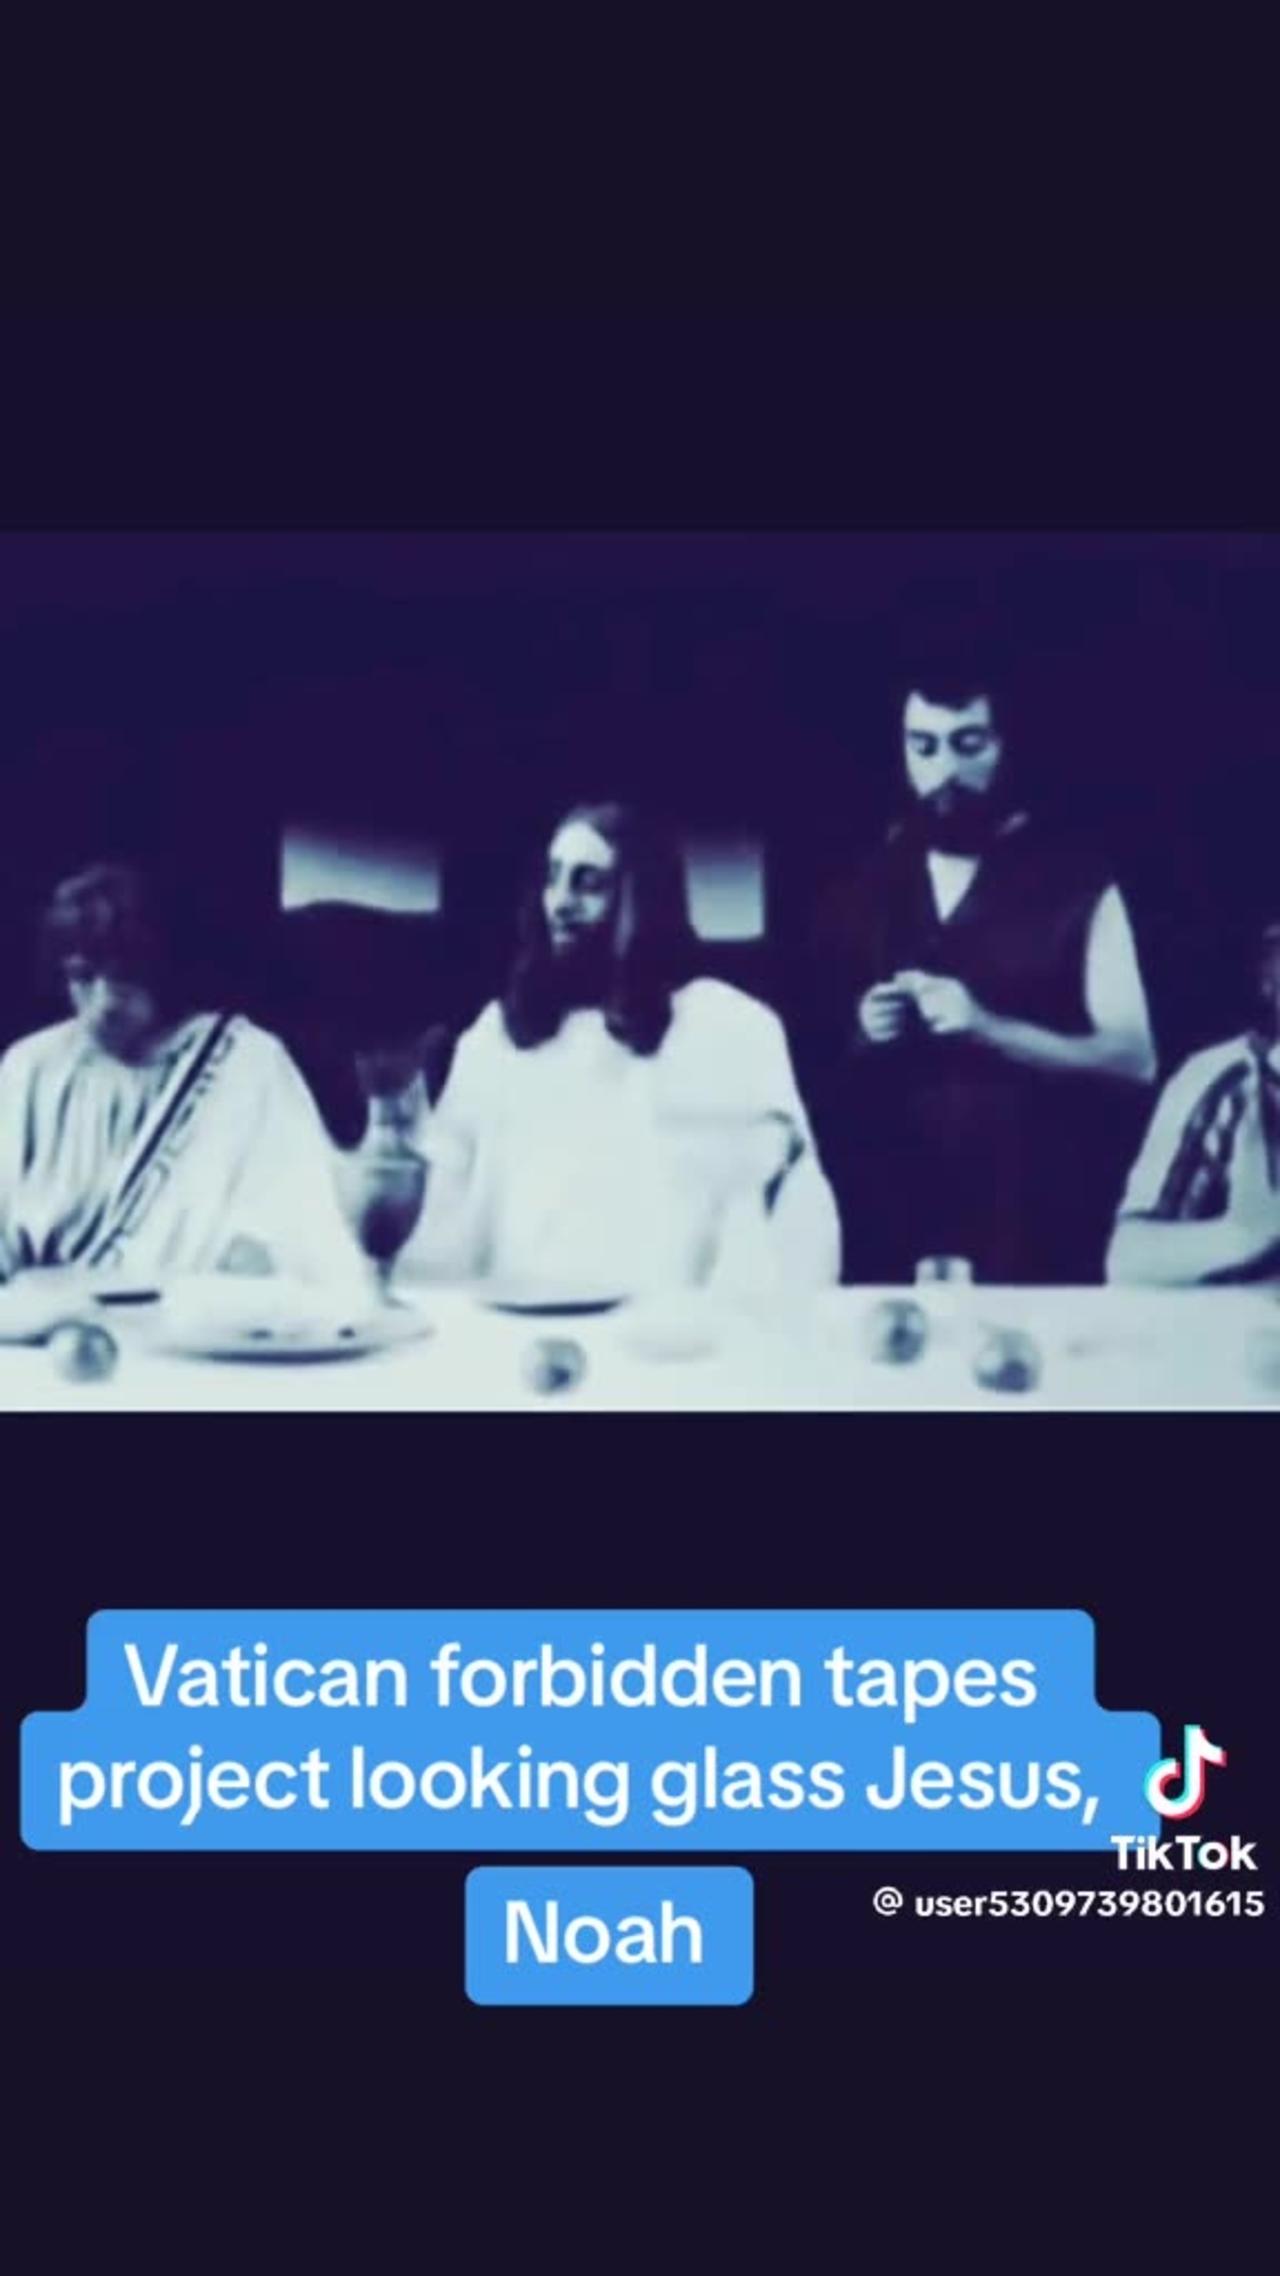 VATICAN HIDDEN FOOTAGE OR FAKE?! PROJECT LOOKING GLASS?!